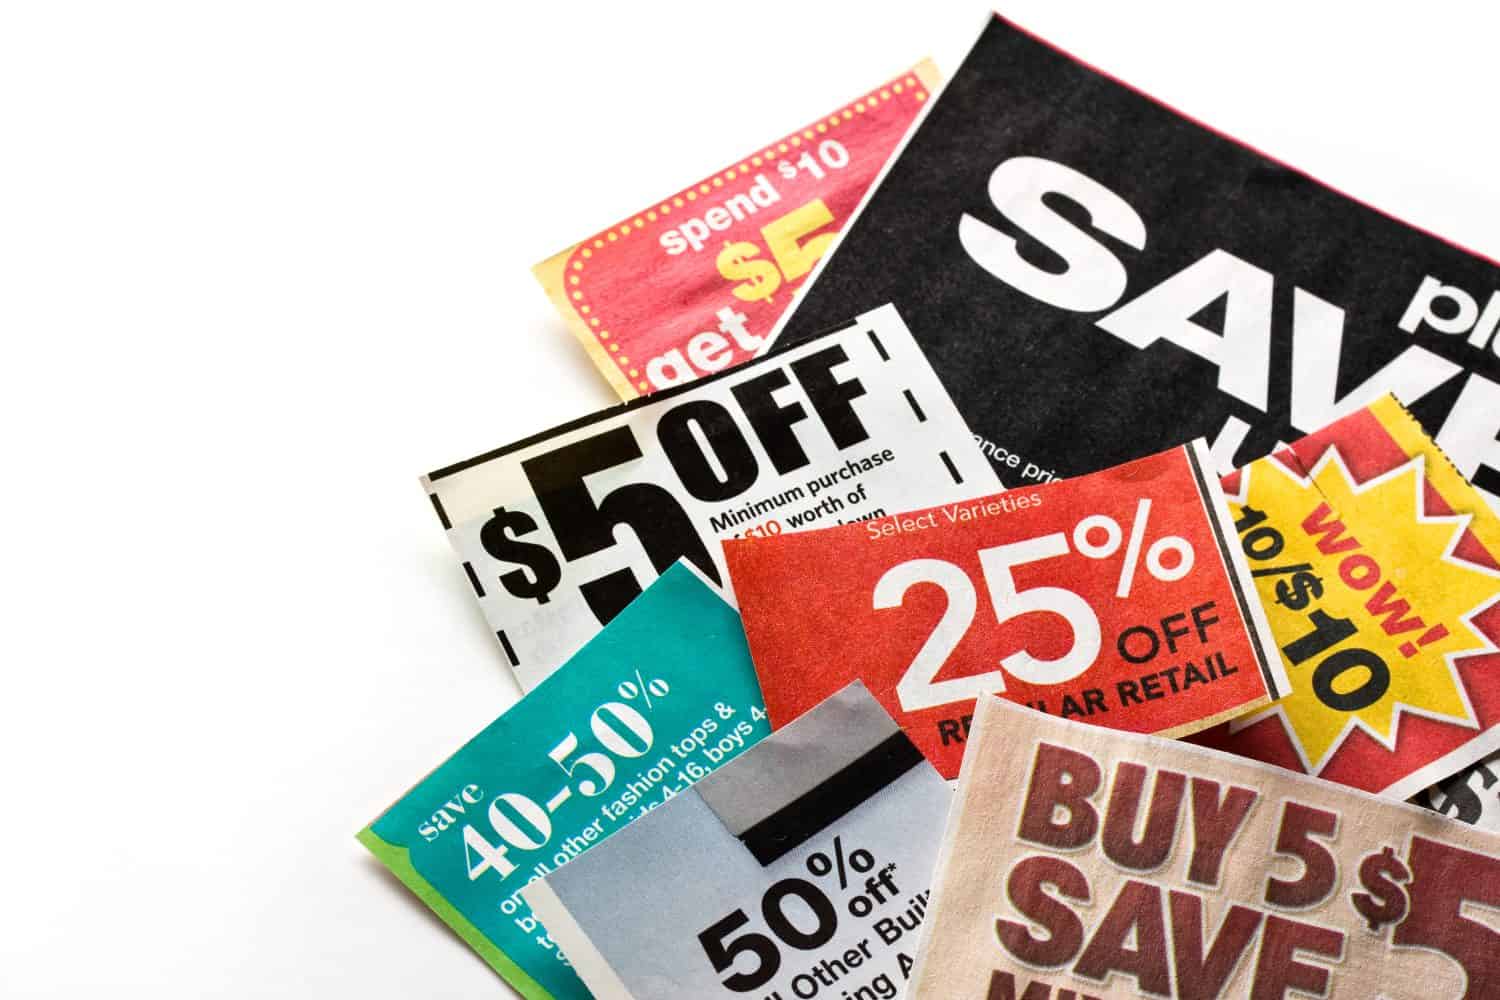 Save money. Colorful coupons on white background.